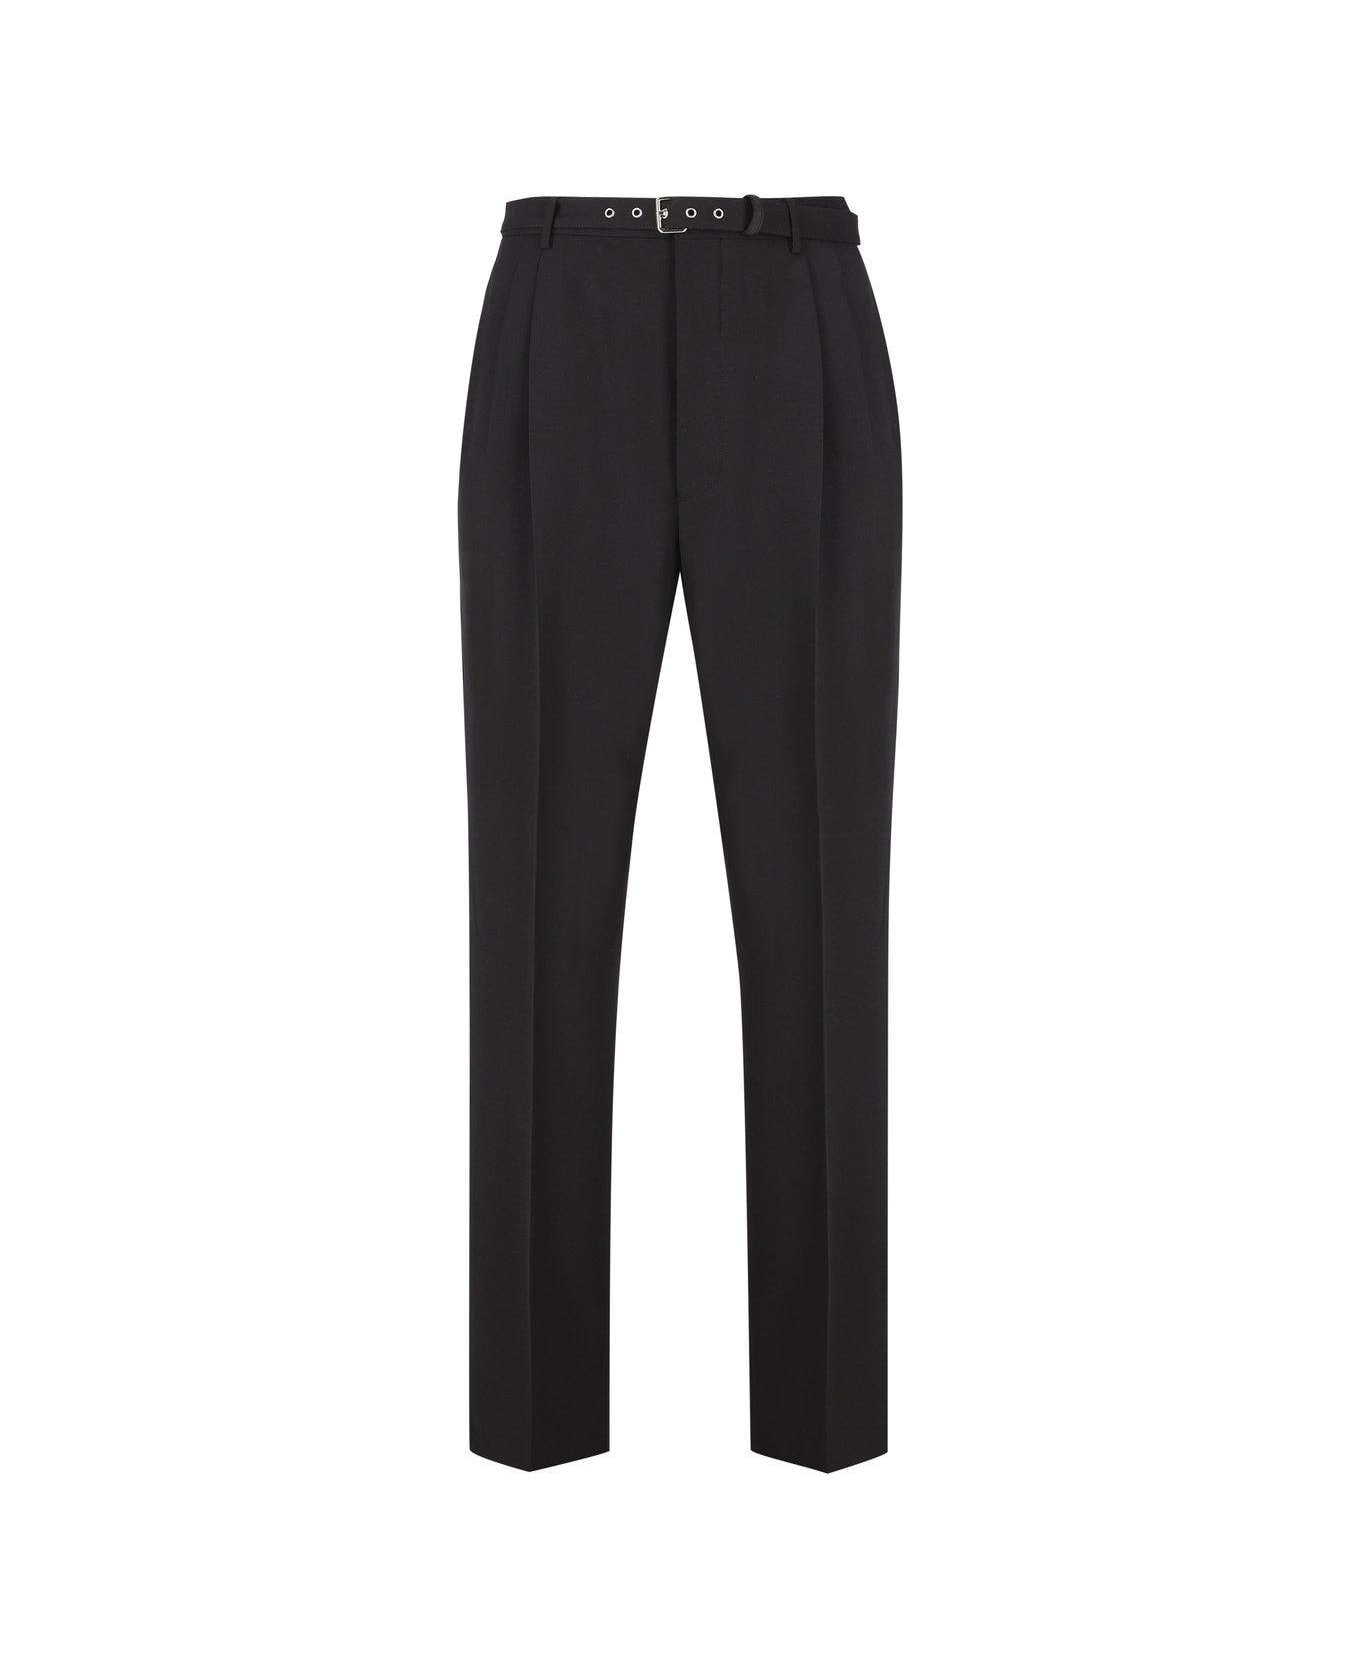 Prada Belted Tailored Trousers - Black